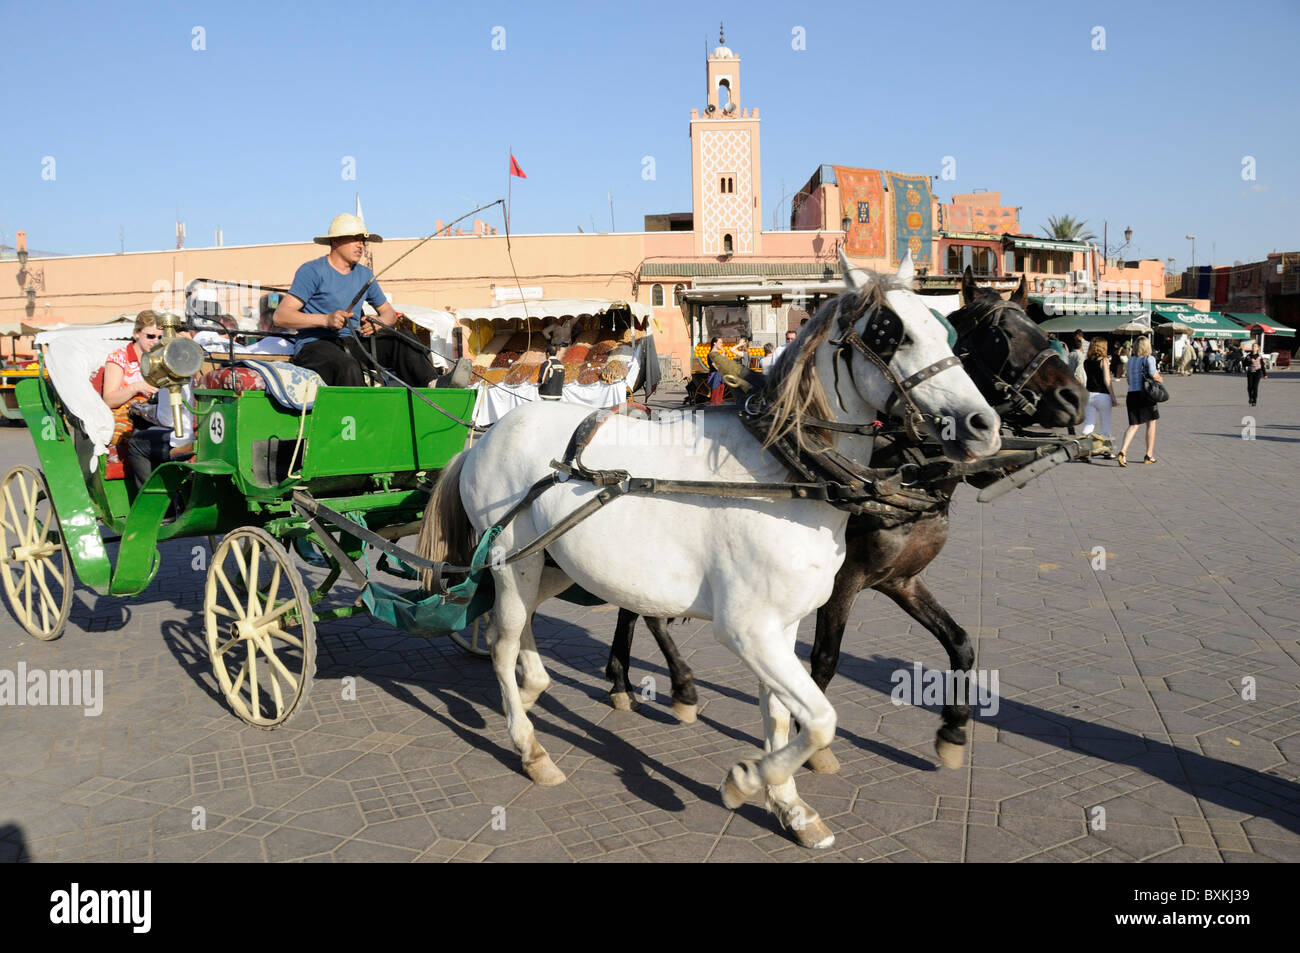 Caleche, one of the best ways to see Marakech,   passing through the busy Djemaa el-Fna meeting place Stock Photo